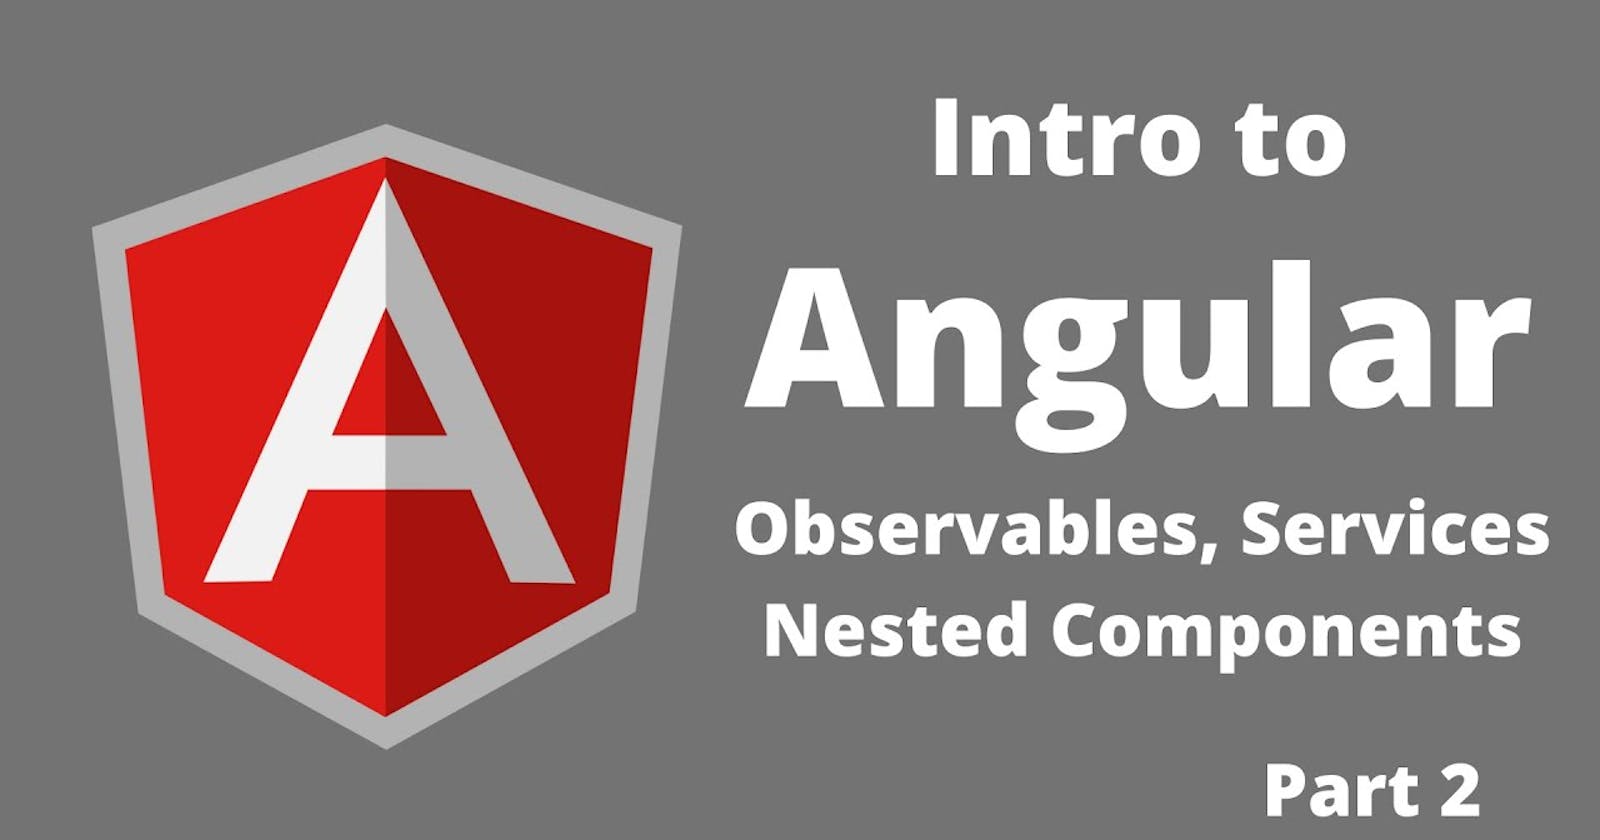 Intro to Angular - Observables, Services, Nested Components